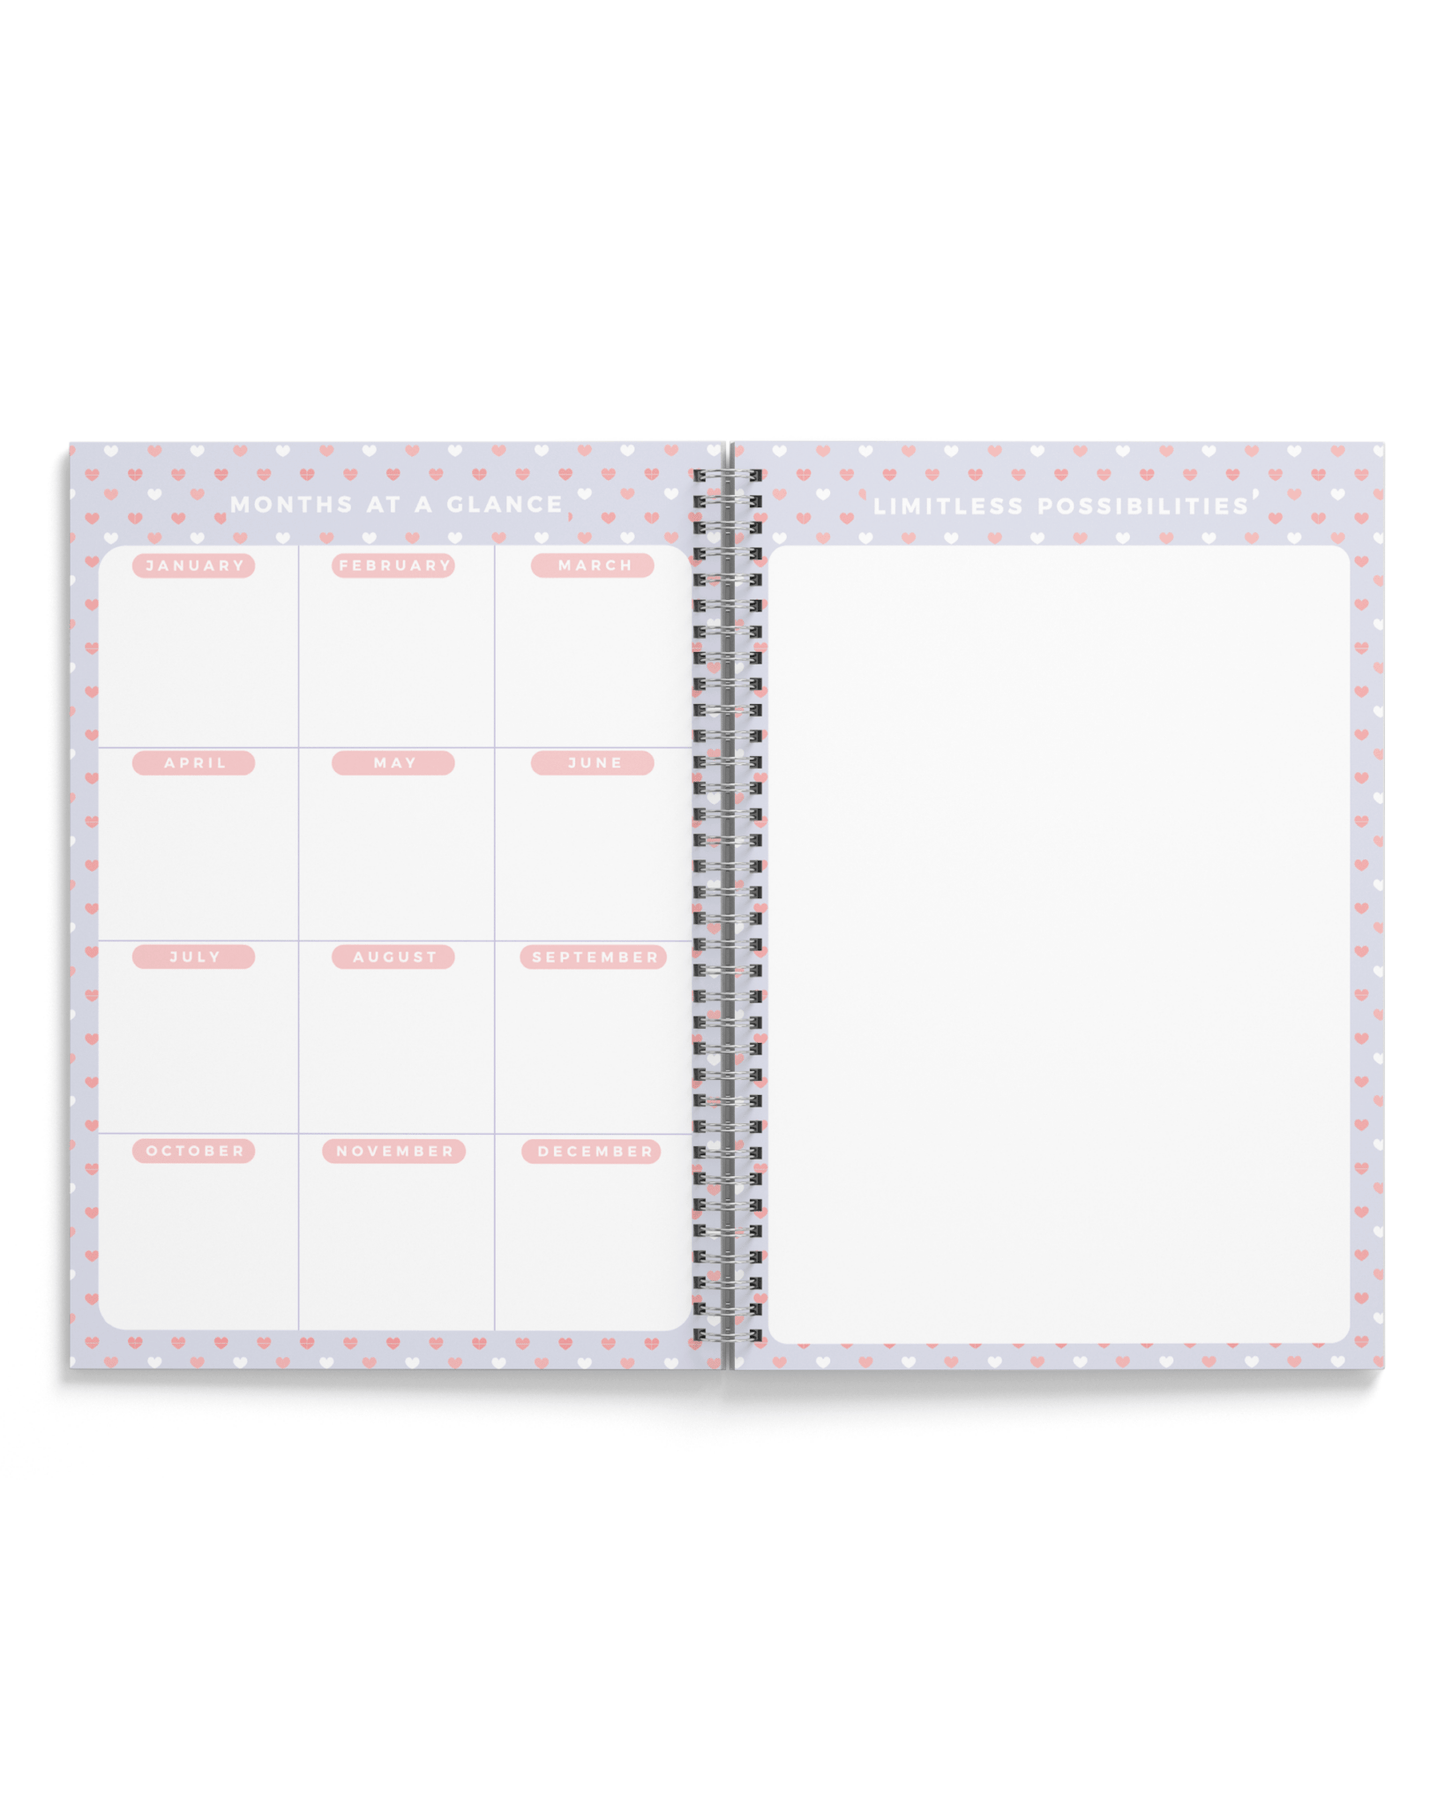 Open for Preorder “Floral Blooms" Annual Dated Planner 2024 | A5 Spiral HardBound - Supple Room